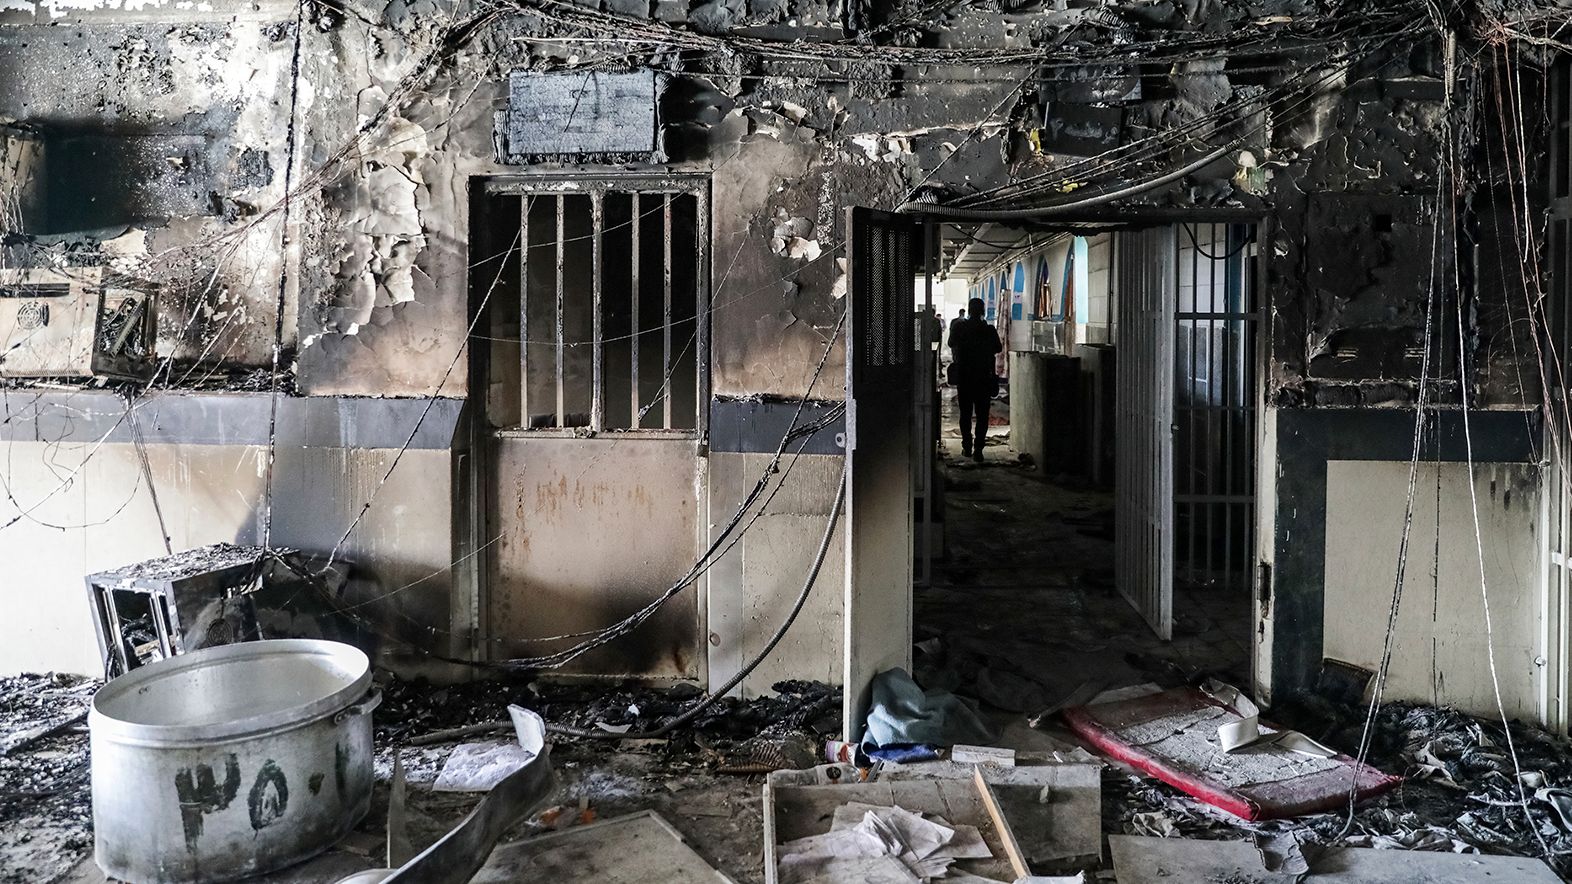 The aftermath of the fire at Evin prison in Tehran on October 16. Eight prisoners were reported dead.